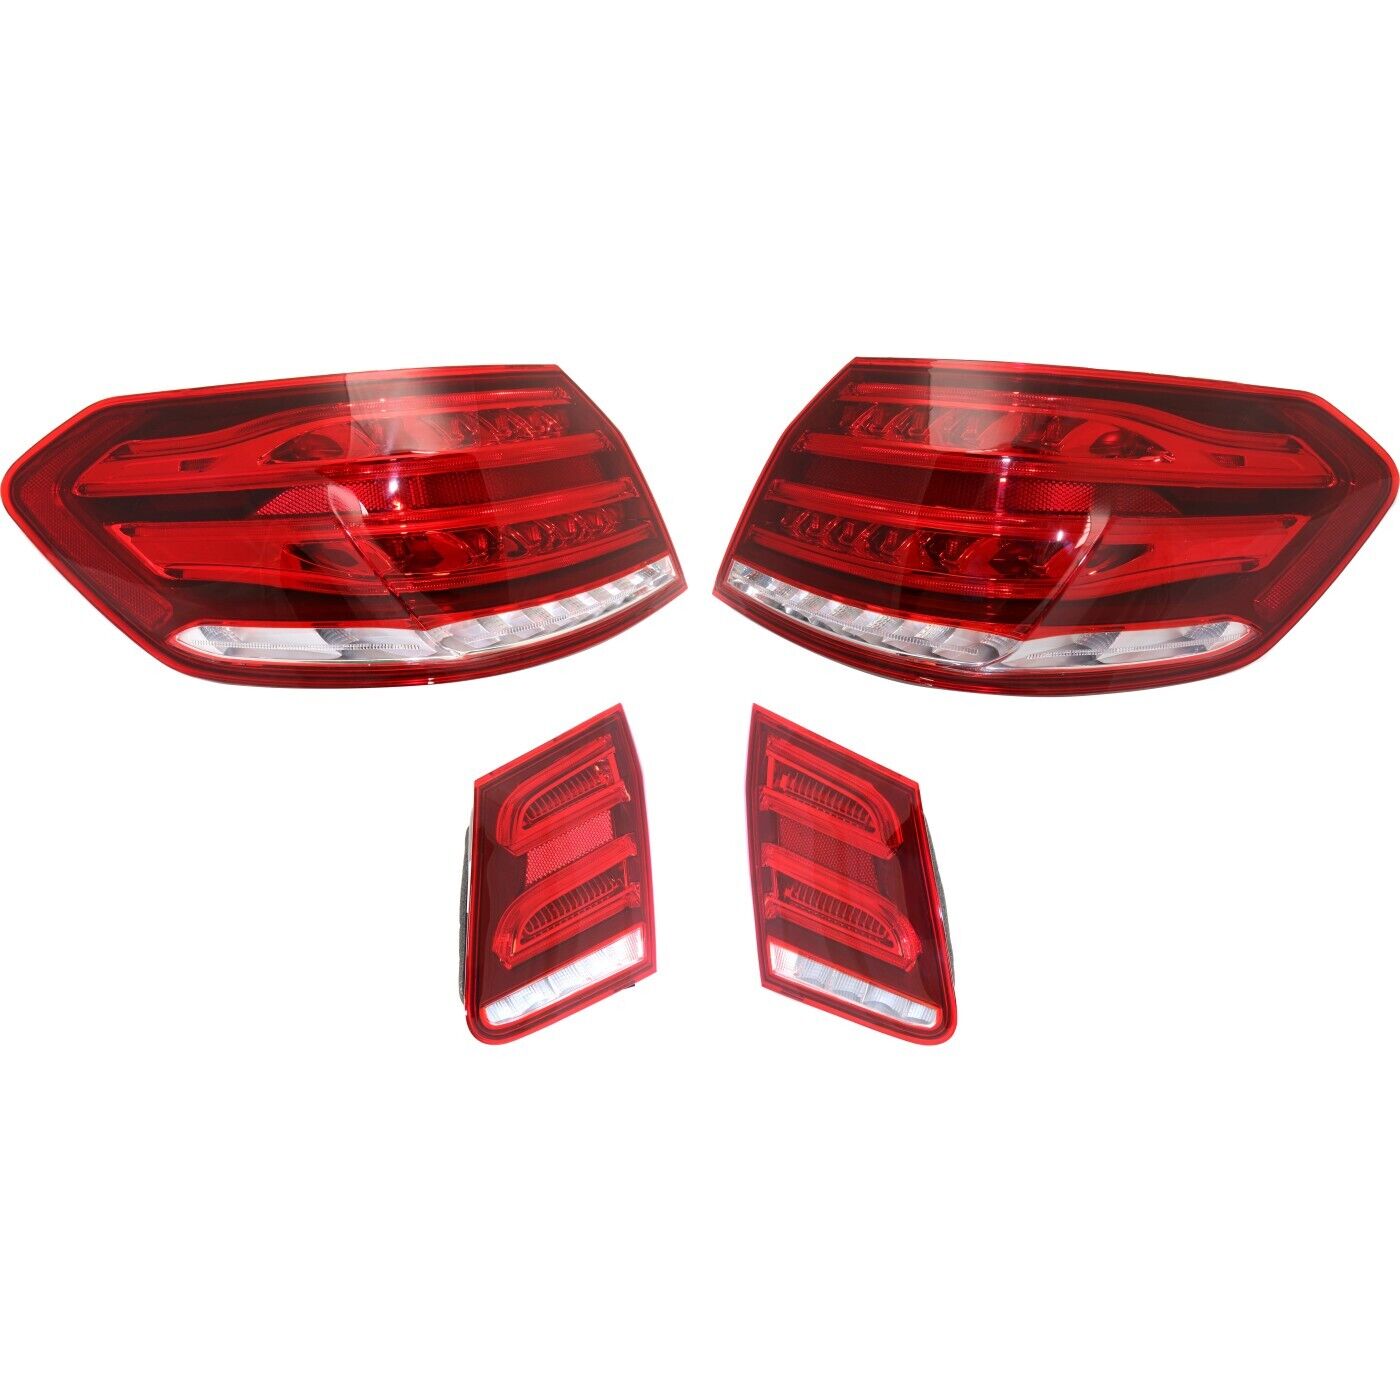 Set of 4 Tail Lights Taillights Taillamps Brakelights  Driver & Passenger Side